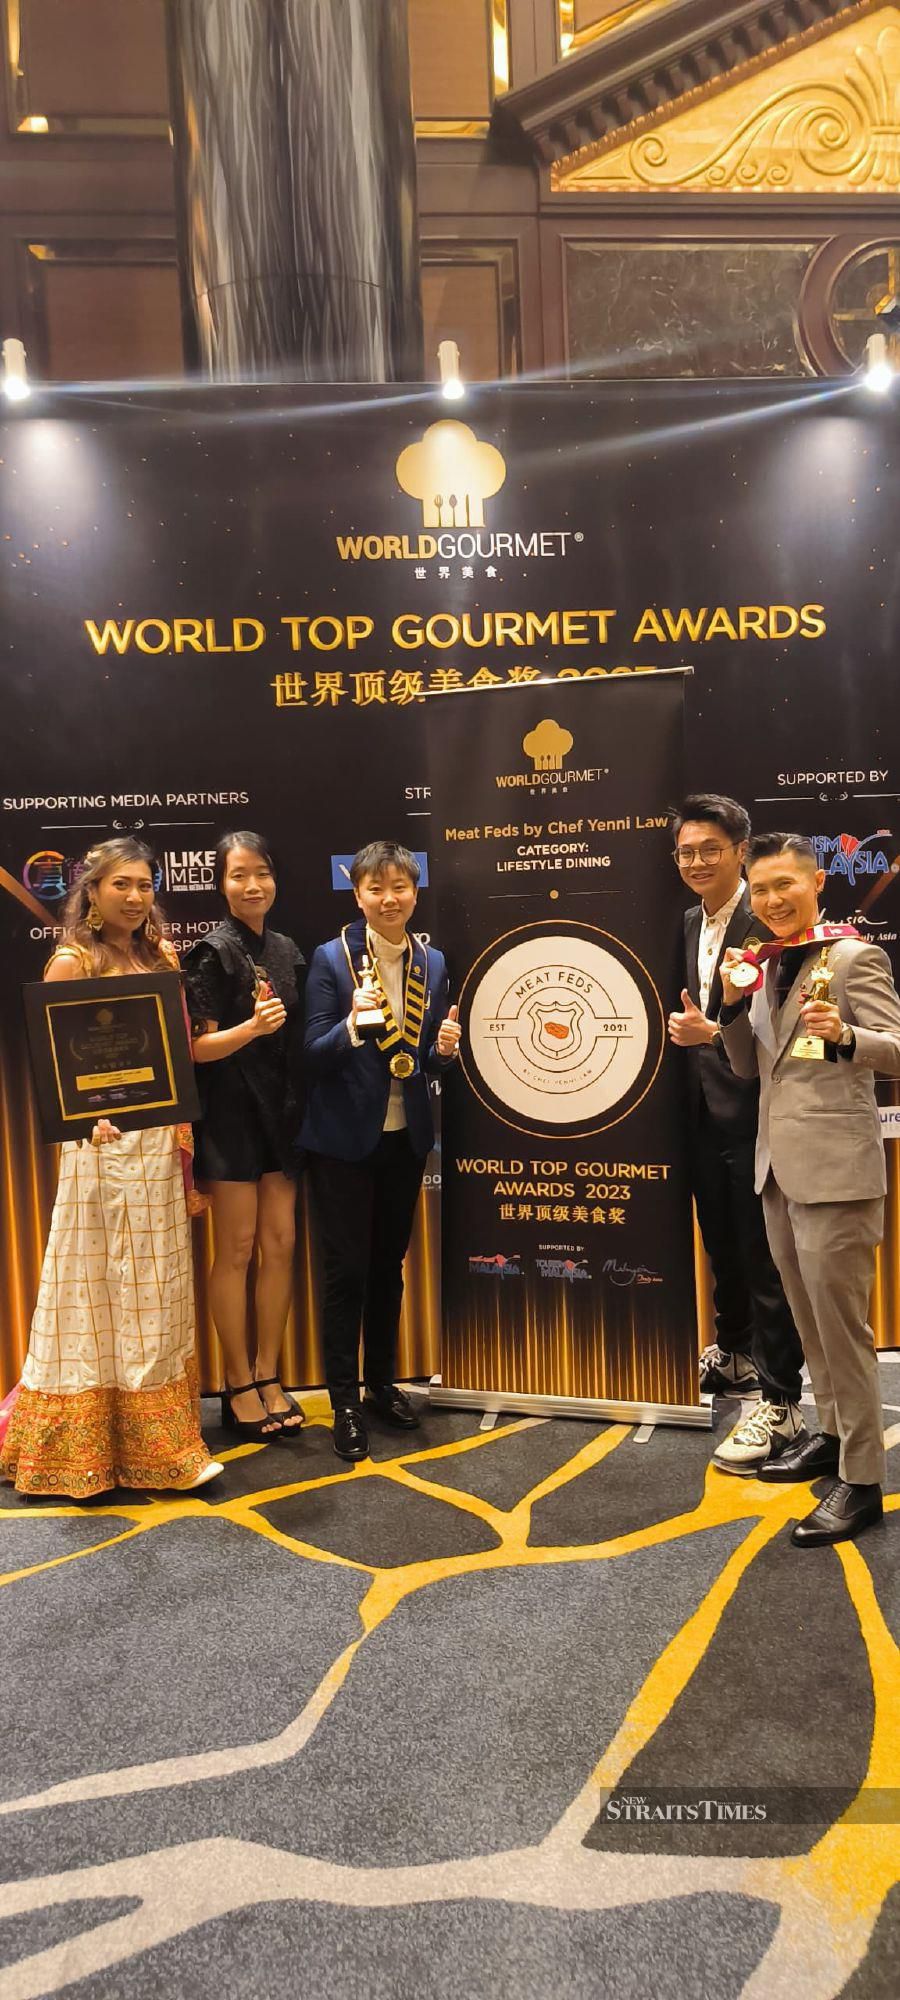  The Meat Feds team who went home with the World Top Gourmet Award for Lifestyle Dining. From left, Hana Sha, Bernice Hon, Shelly Saw, Alex Ching and Yenni Law.